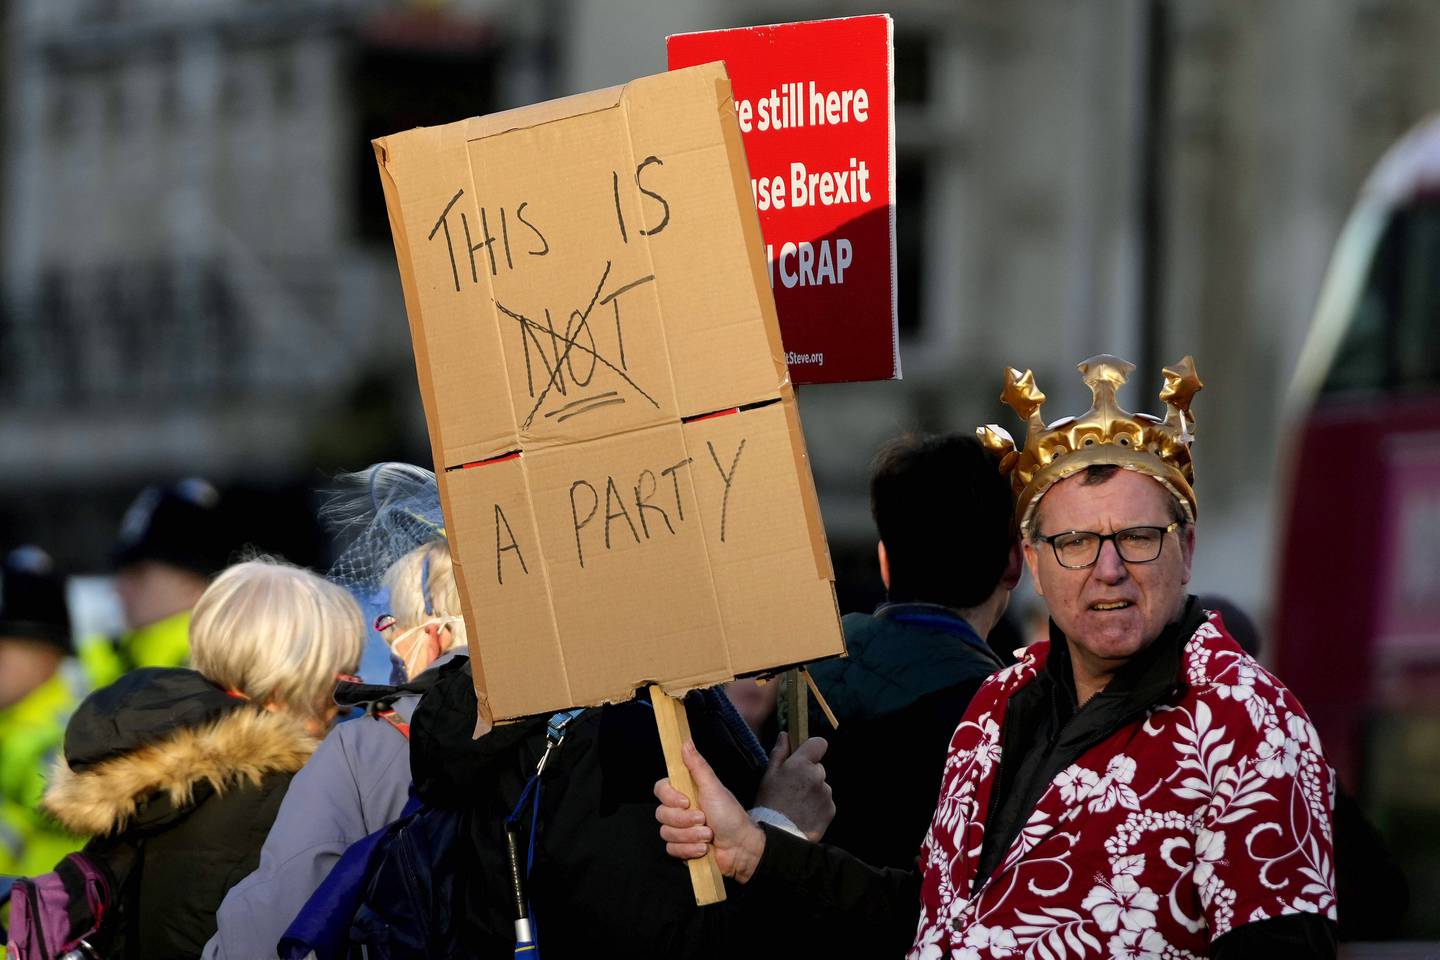 Protesters against 'partygate' in Parliament Square, central London, as Boris Johnson attends the weekly Prime Minister's Questions session. AP Photo